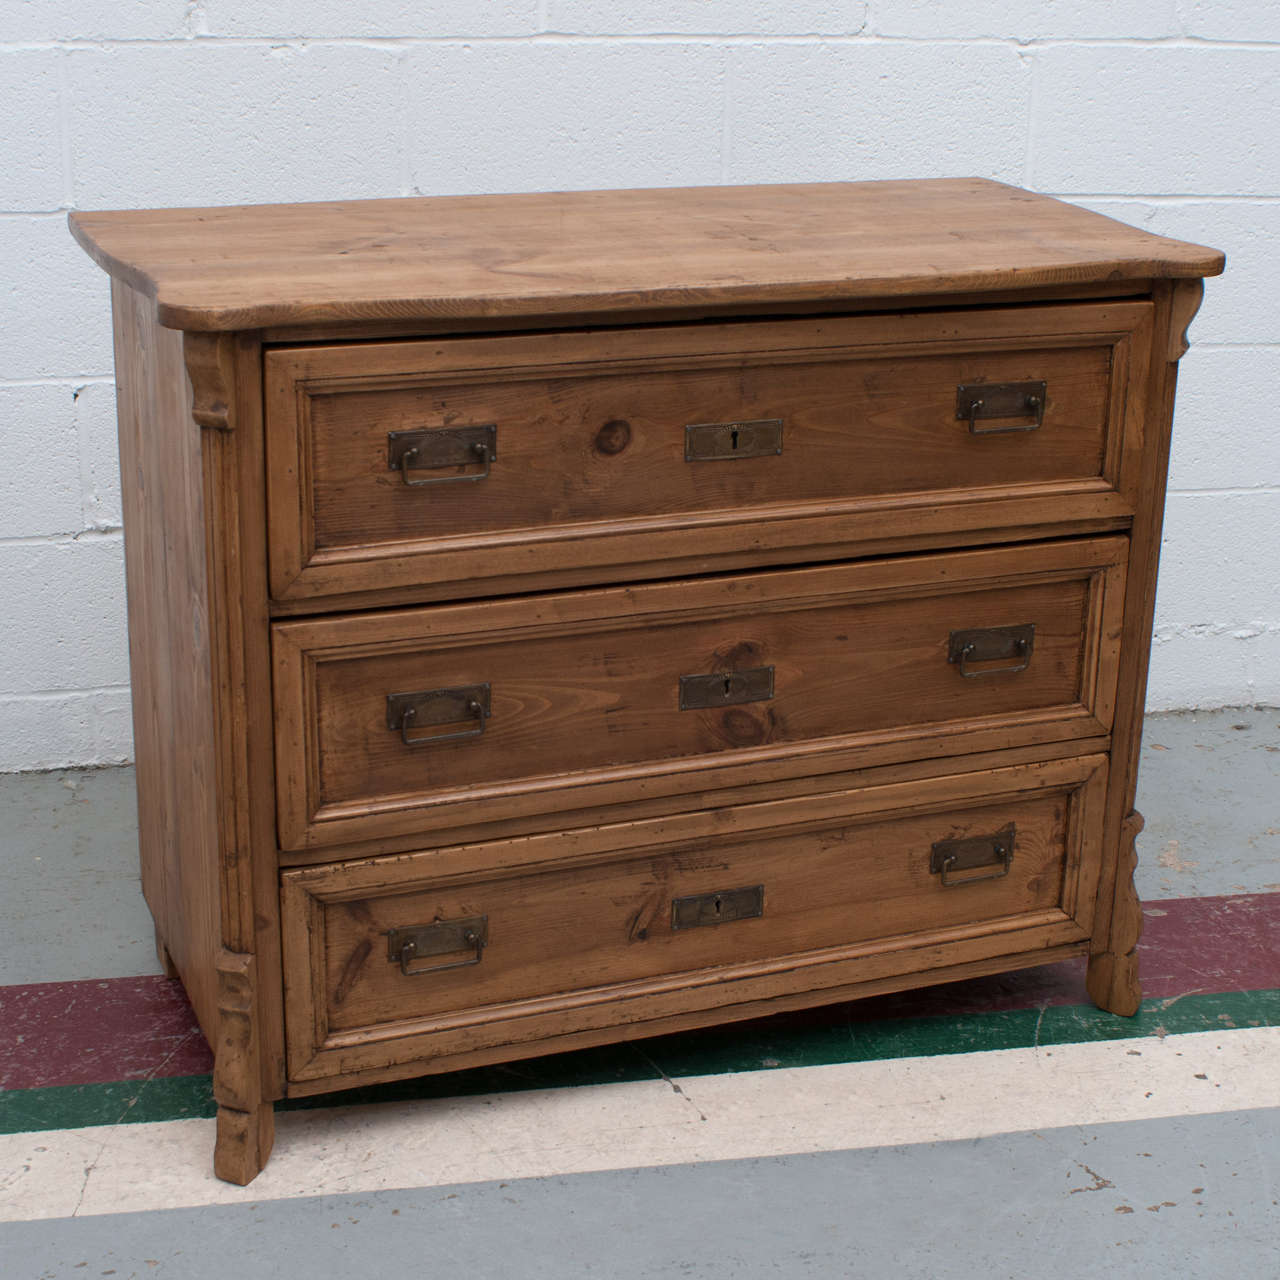 A small chest of three hand-cut dovetailed drawers with decorative corner molding and a serpentine top.